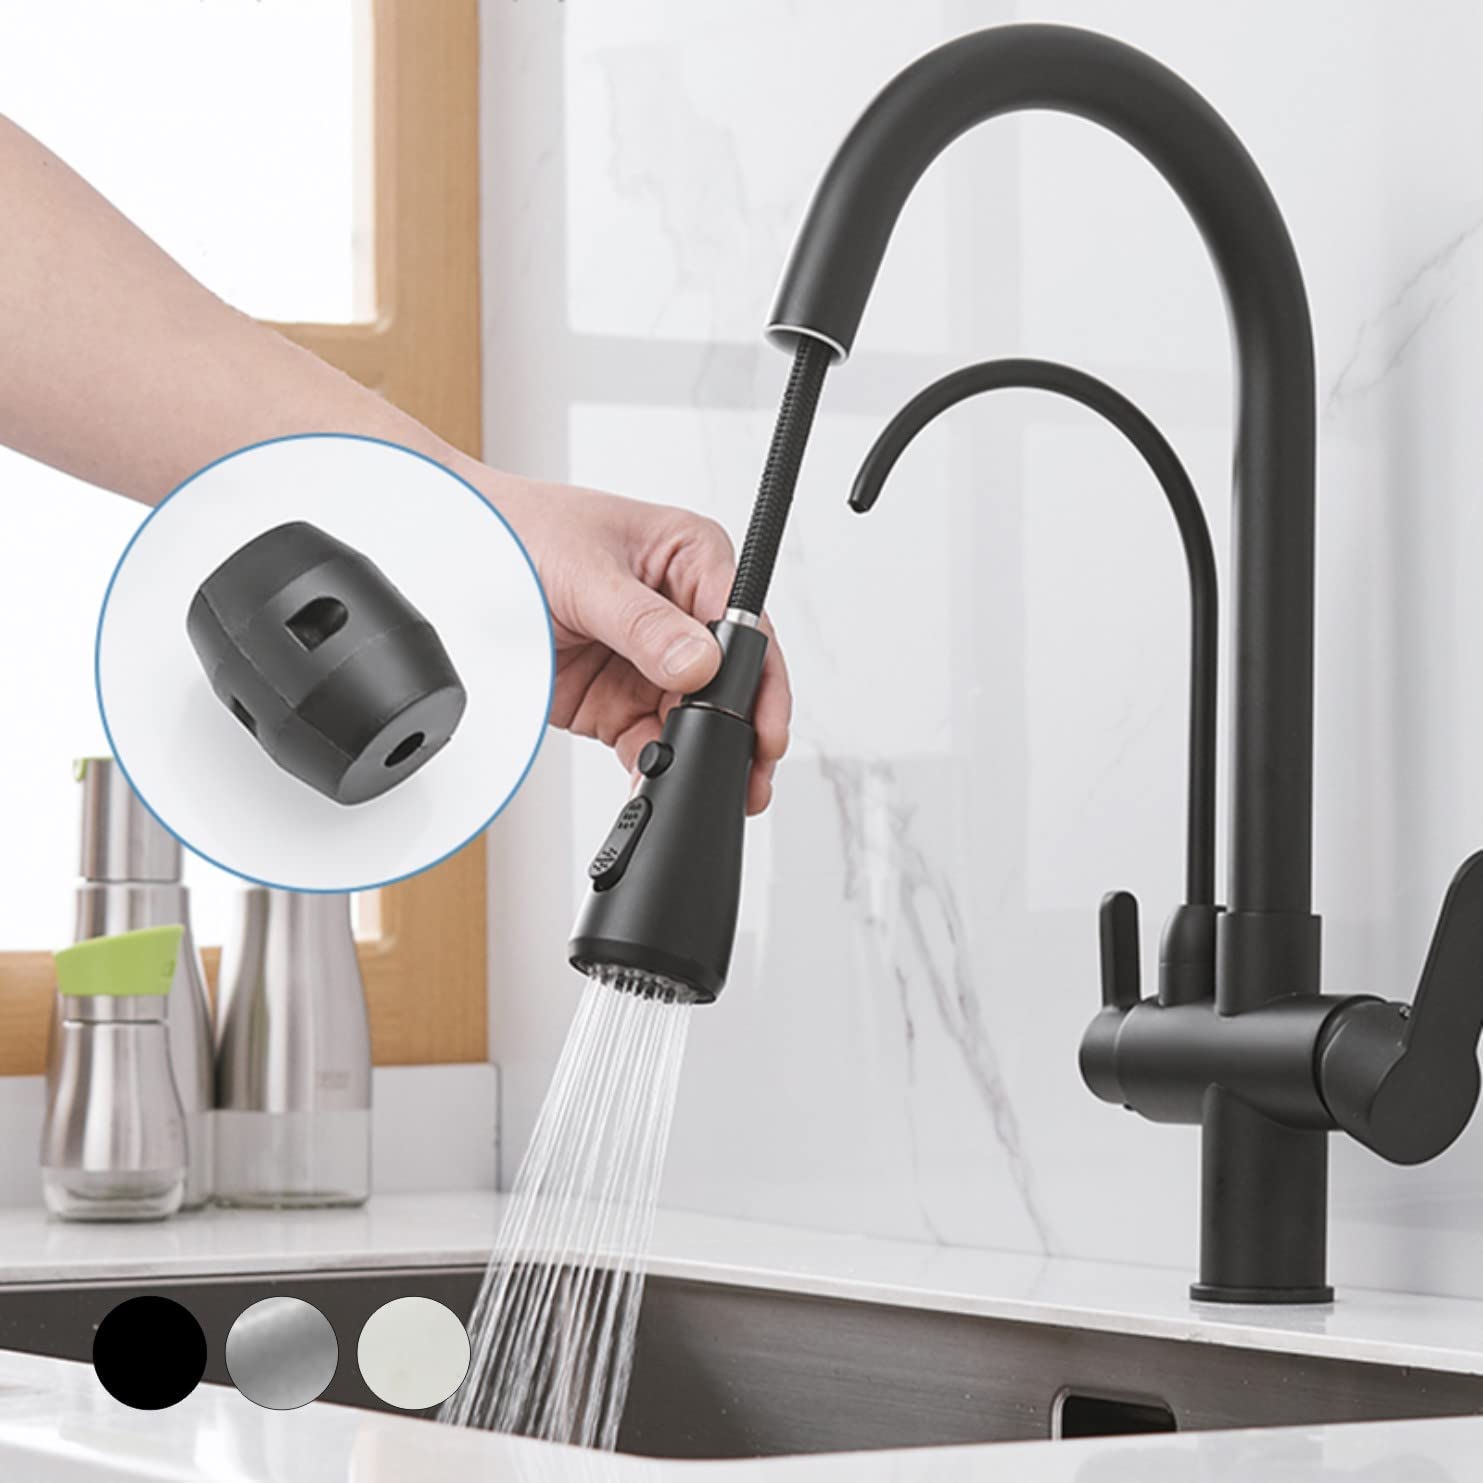 What causes low water pressure in kitchen sink?